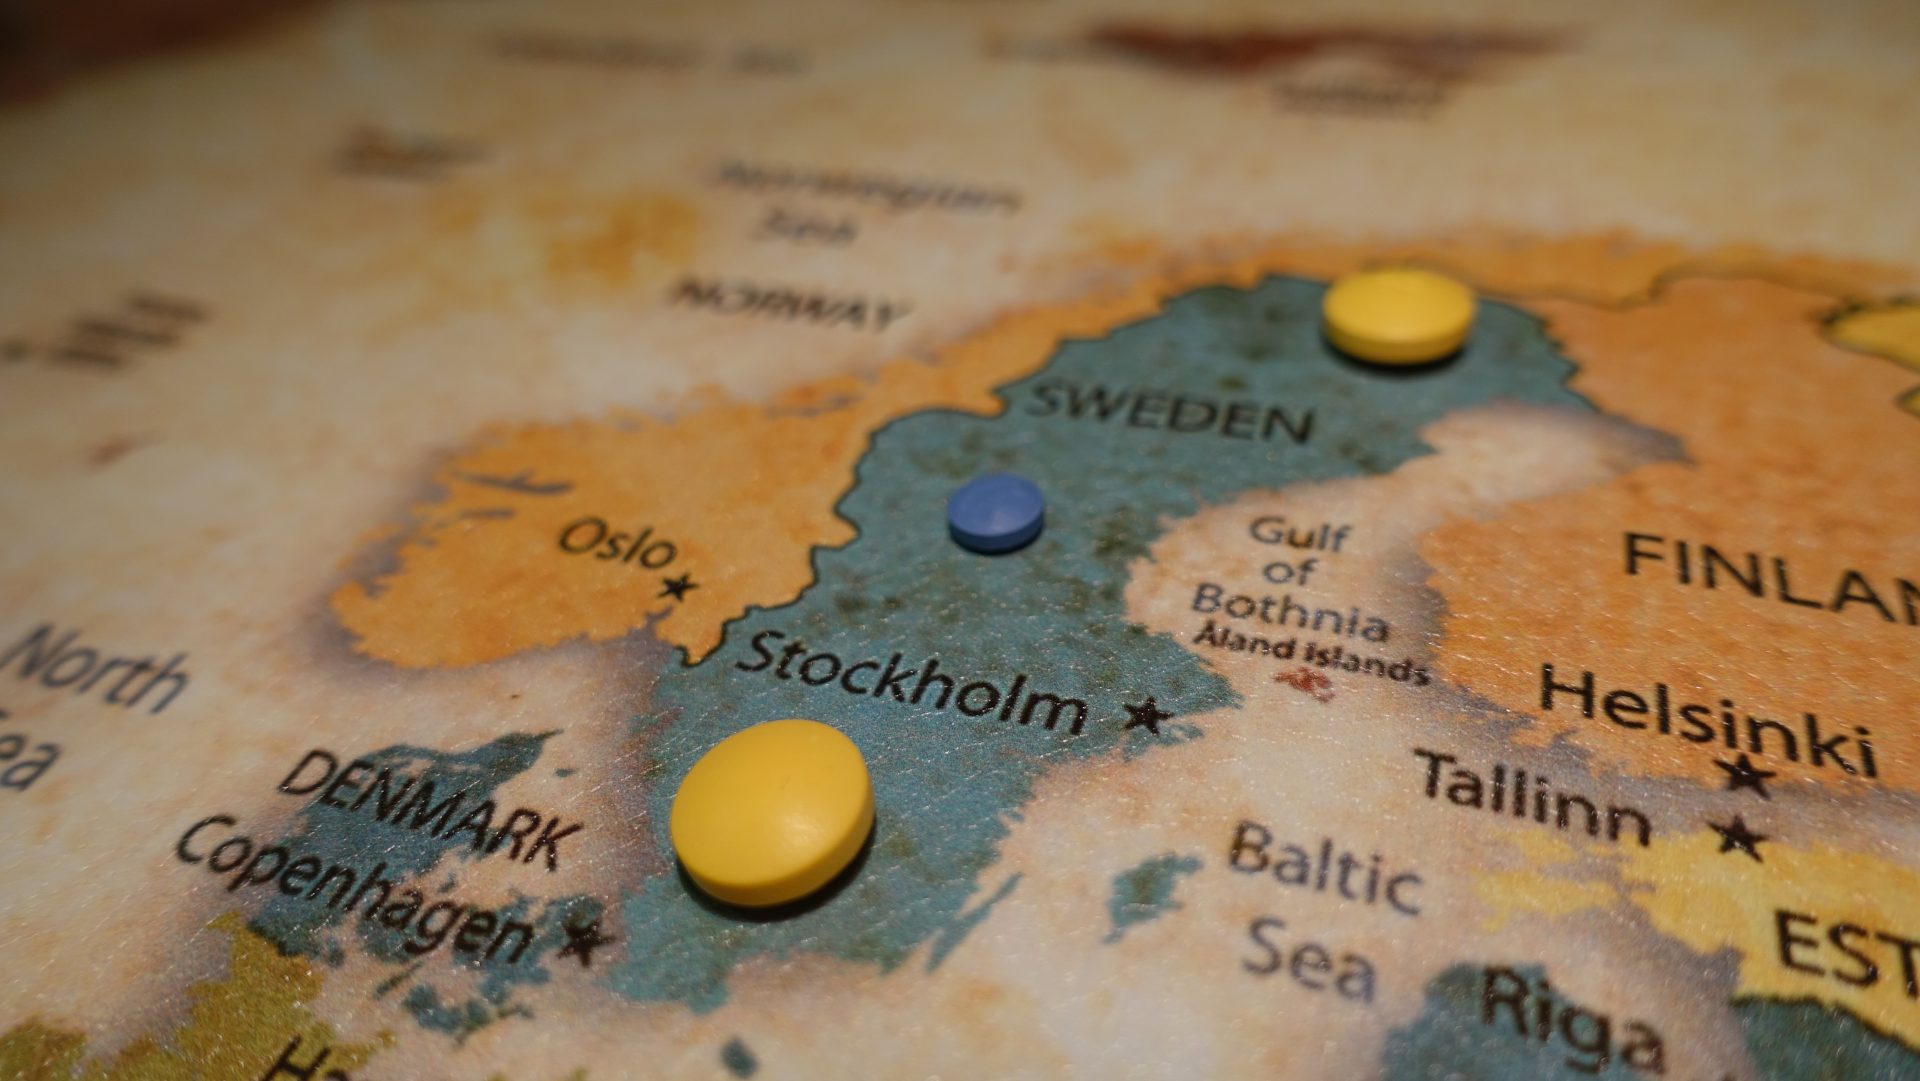 Pills on a printed map of Sweden highlighting the capital of Stockholm